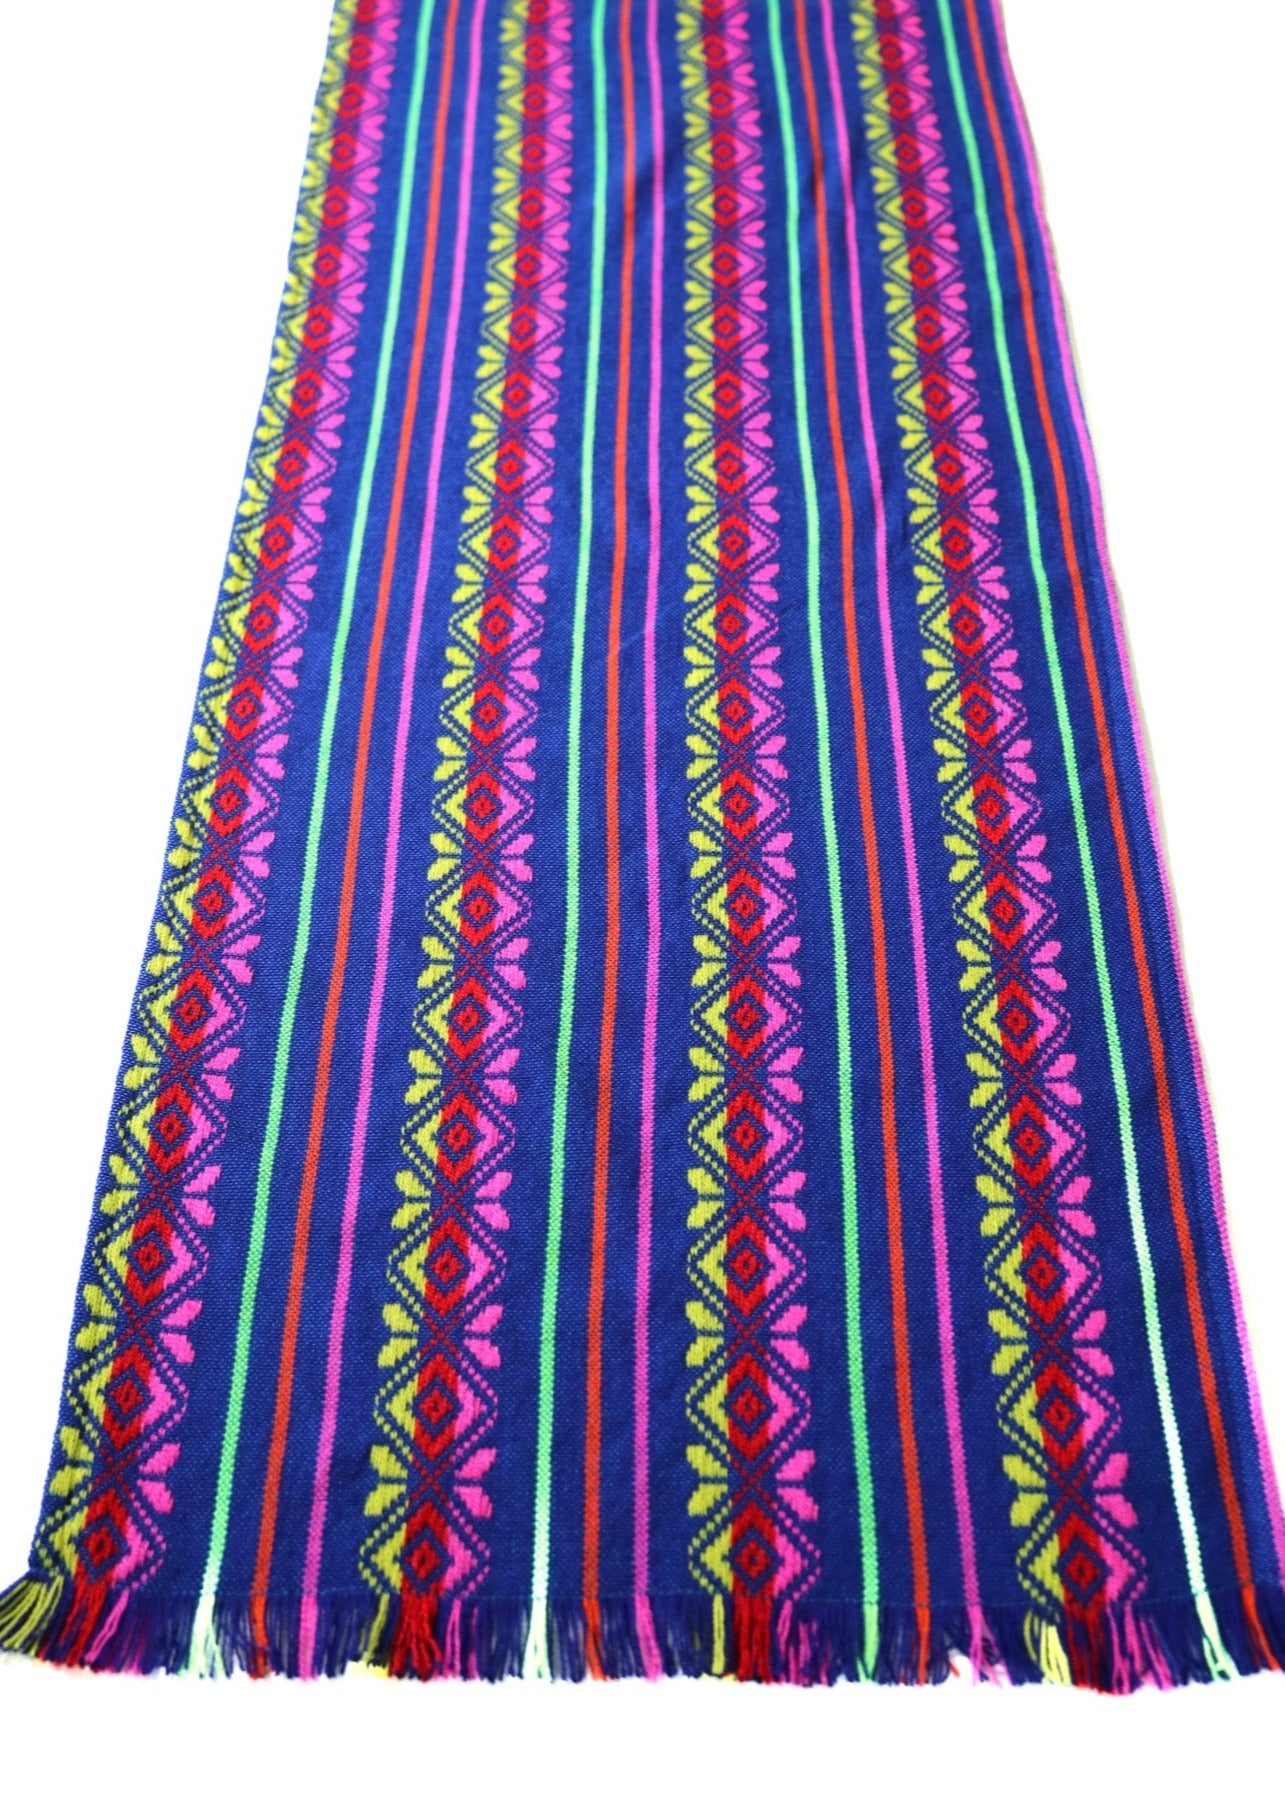 Mexican Fiesta Table Runner or Tablecloth- Dark teal